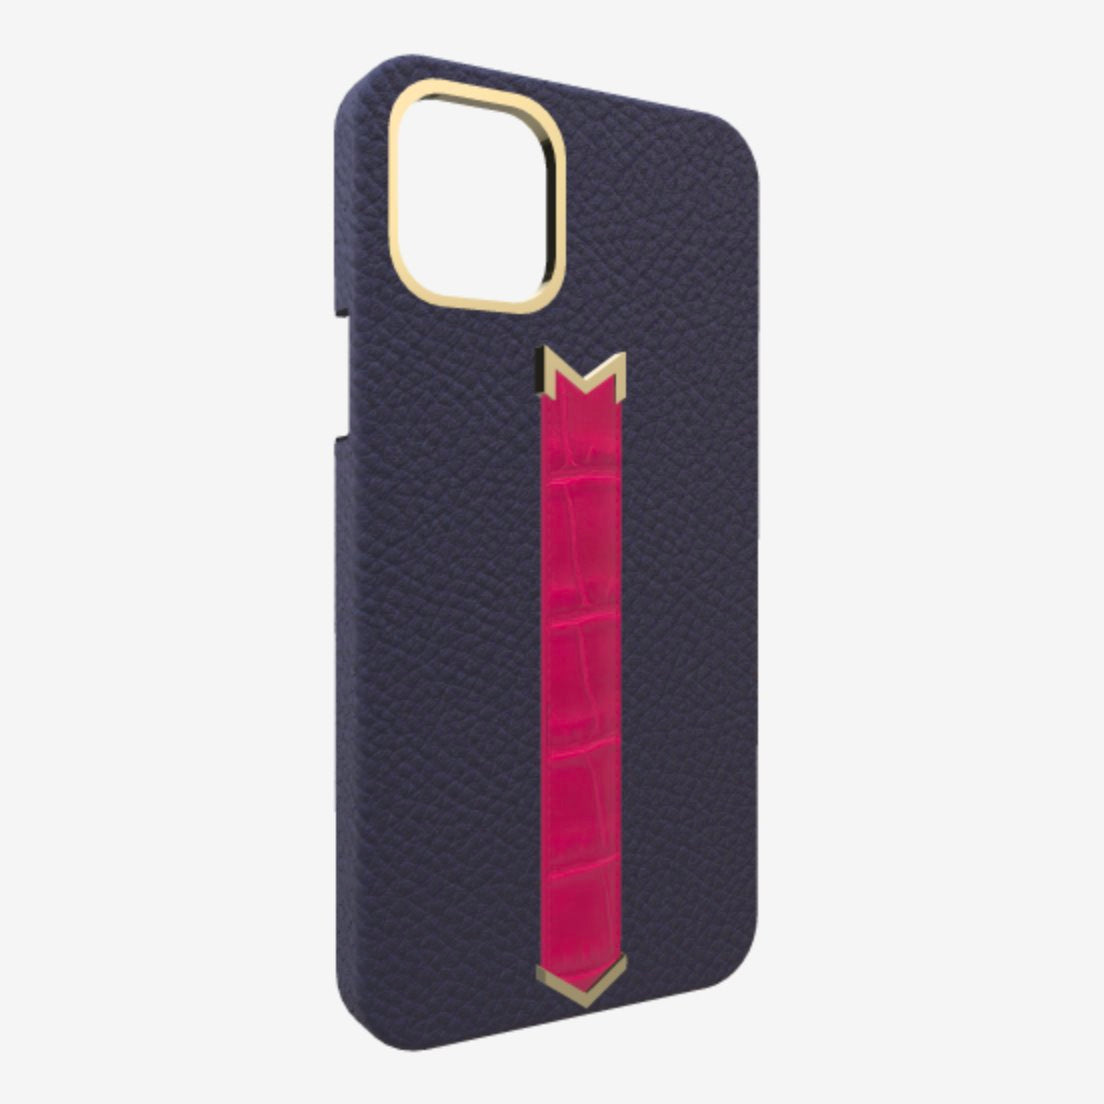 Gold Finger Strap Case for iPhone 13 in Genuine Calfskin and Alligator Navy Blue Fuchsia Party 